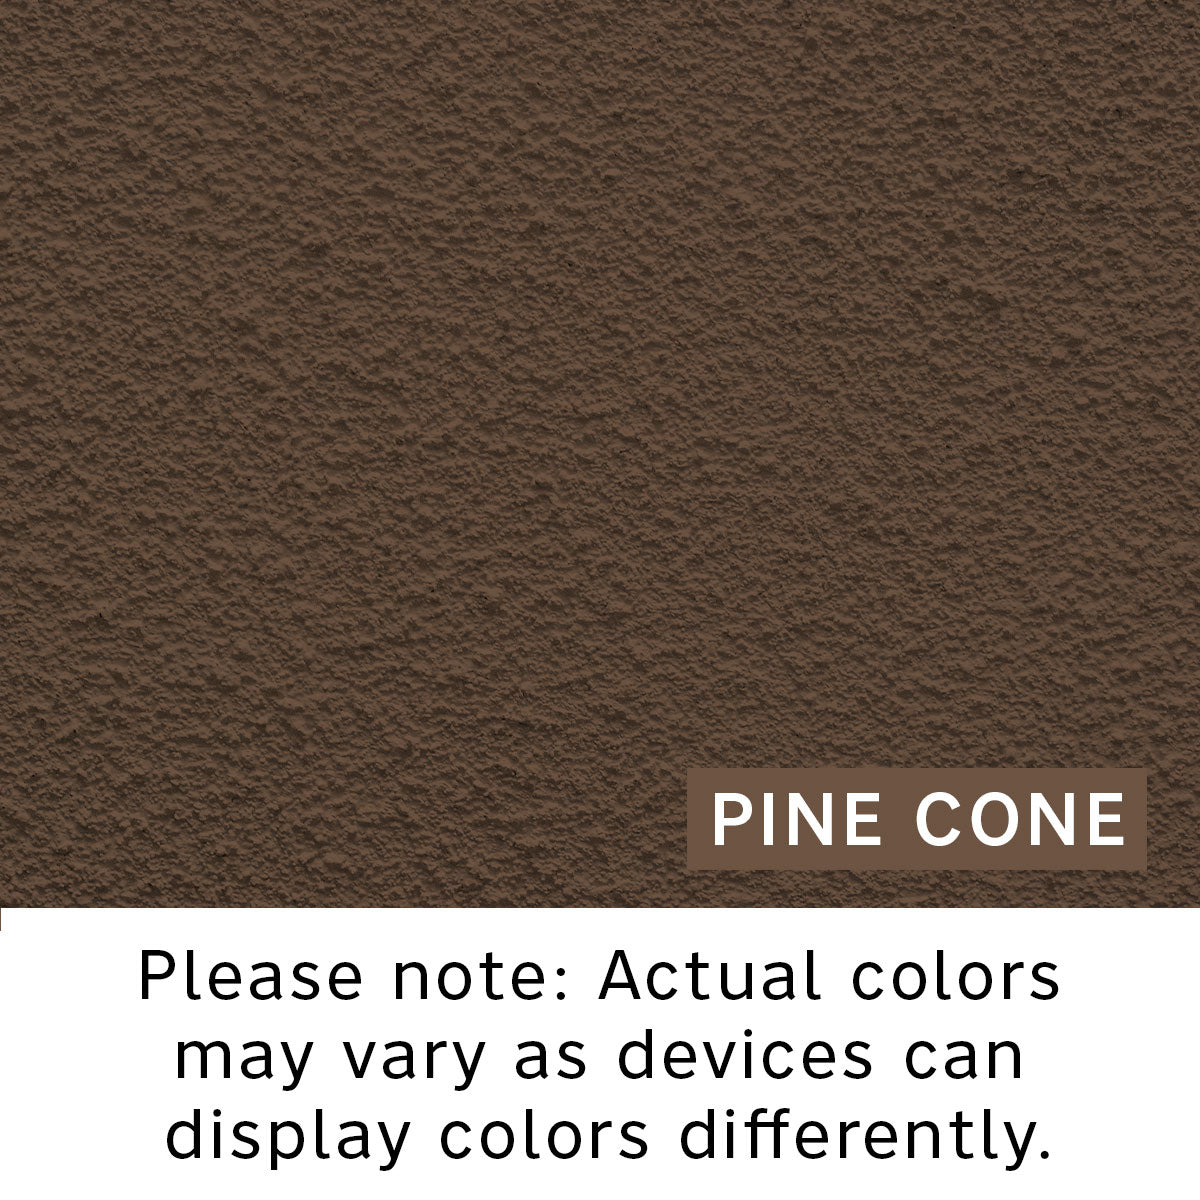 Texture-Eez color swatch for Pine Cone